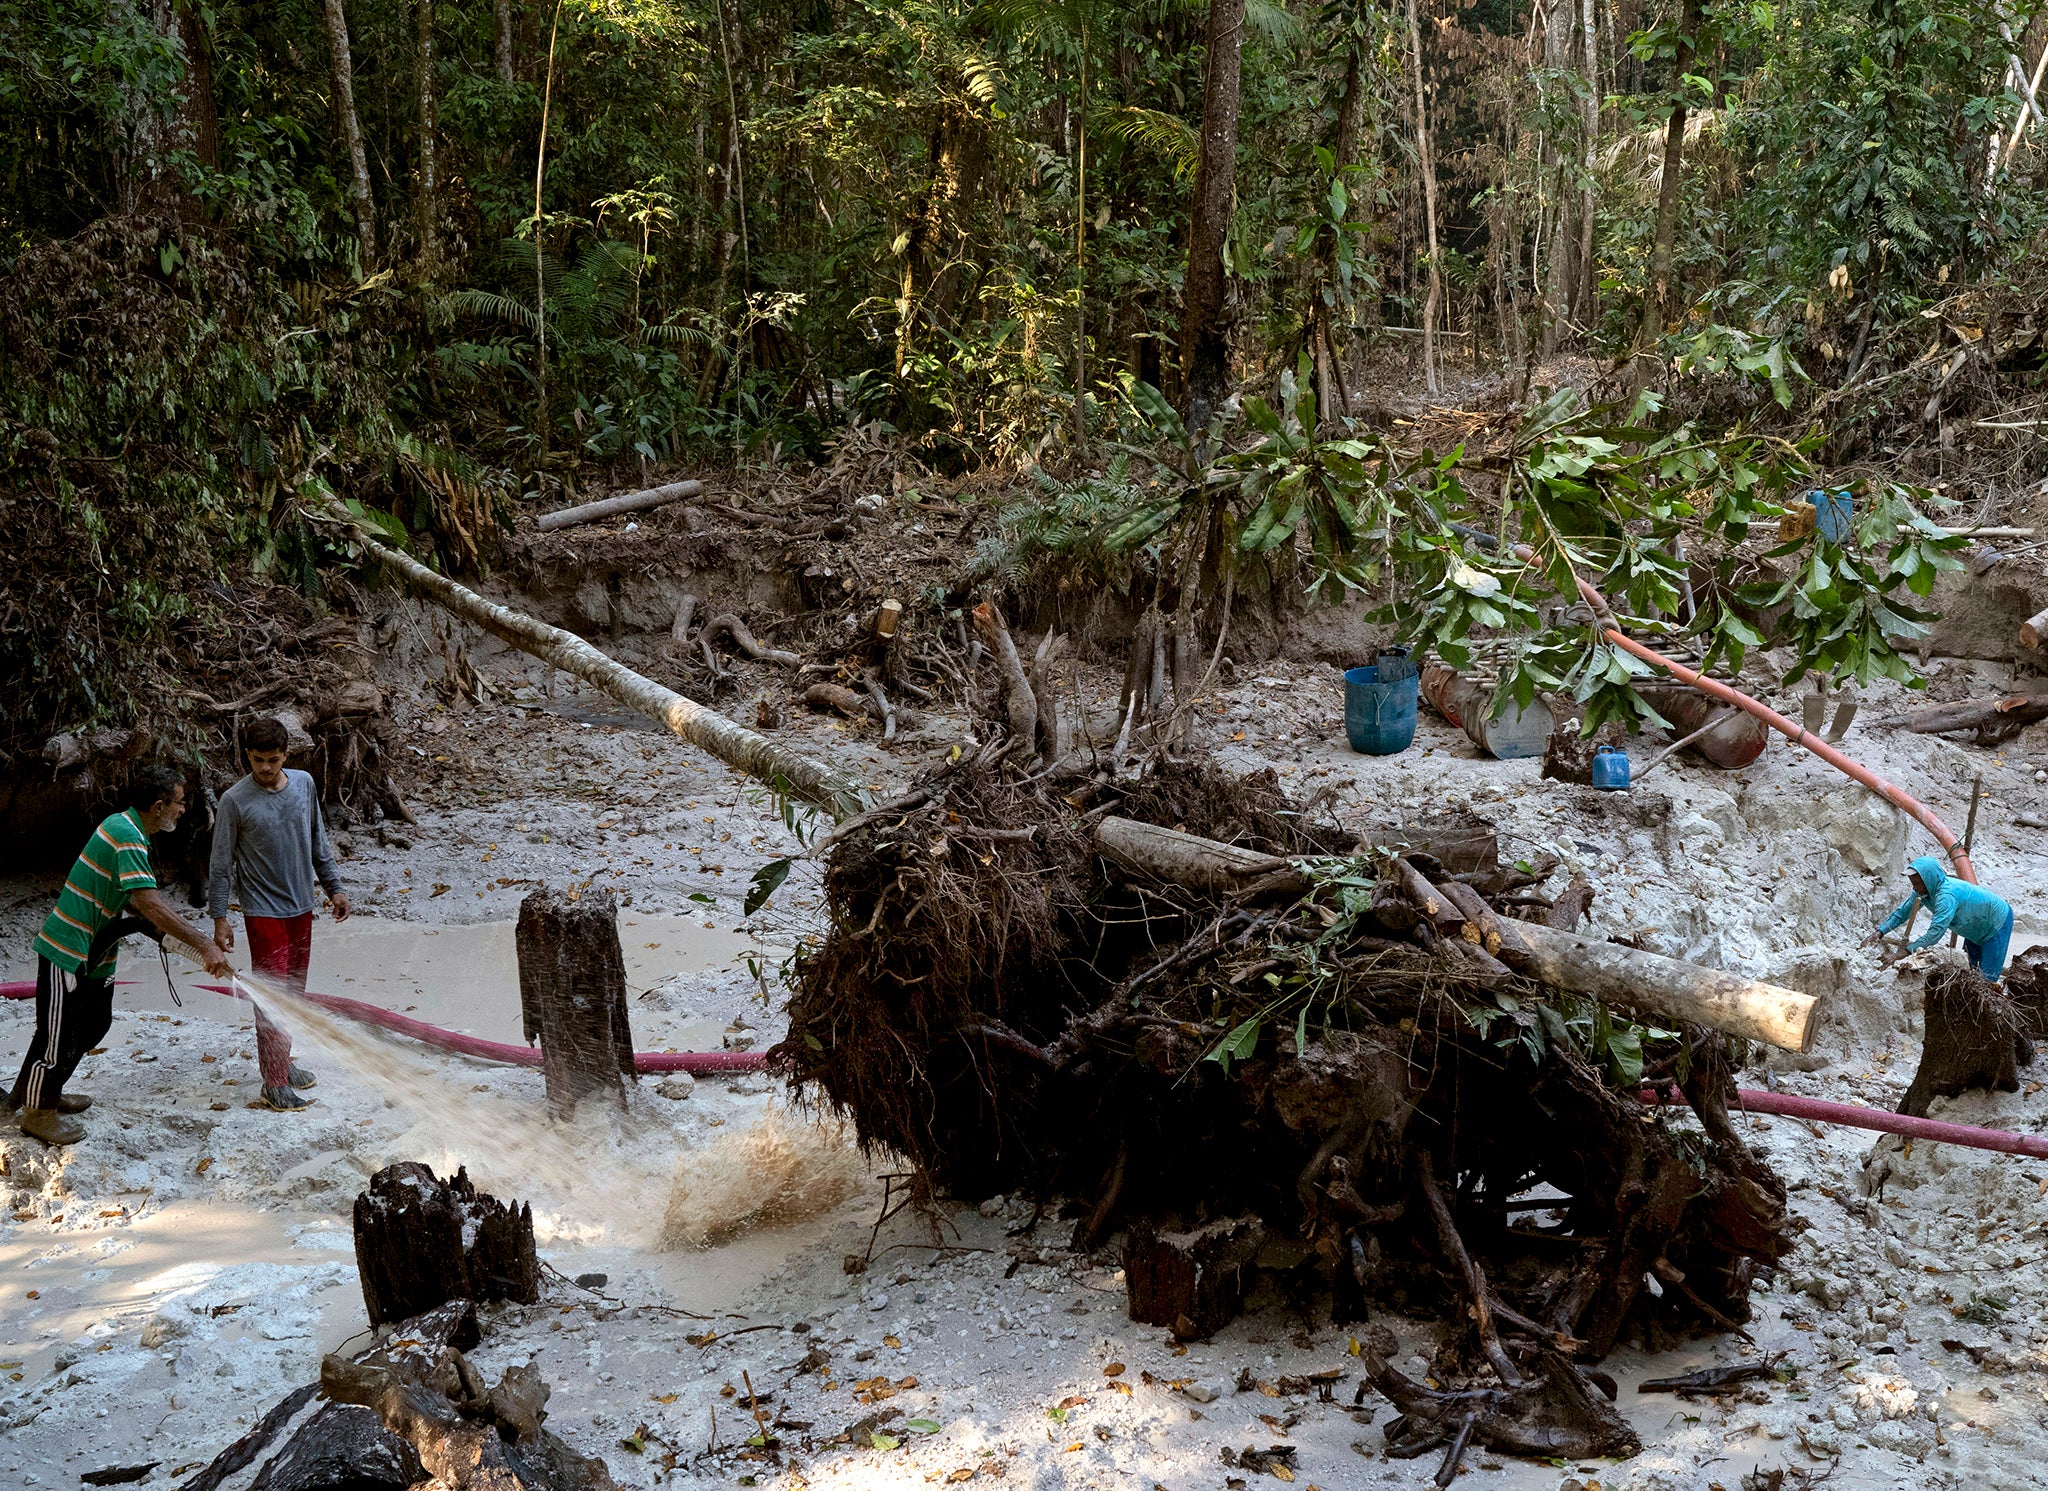 Miners work in a ravine at an illegal site in the Amazon